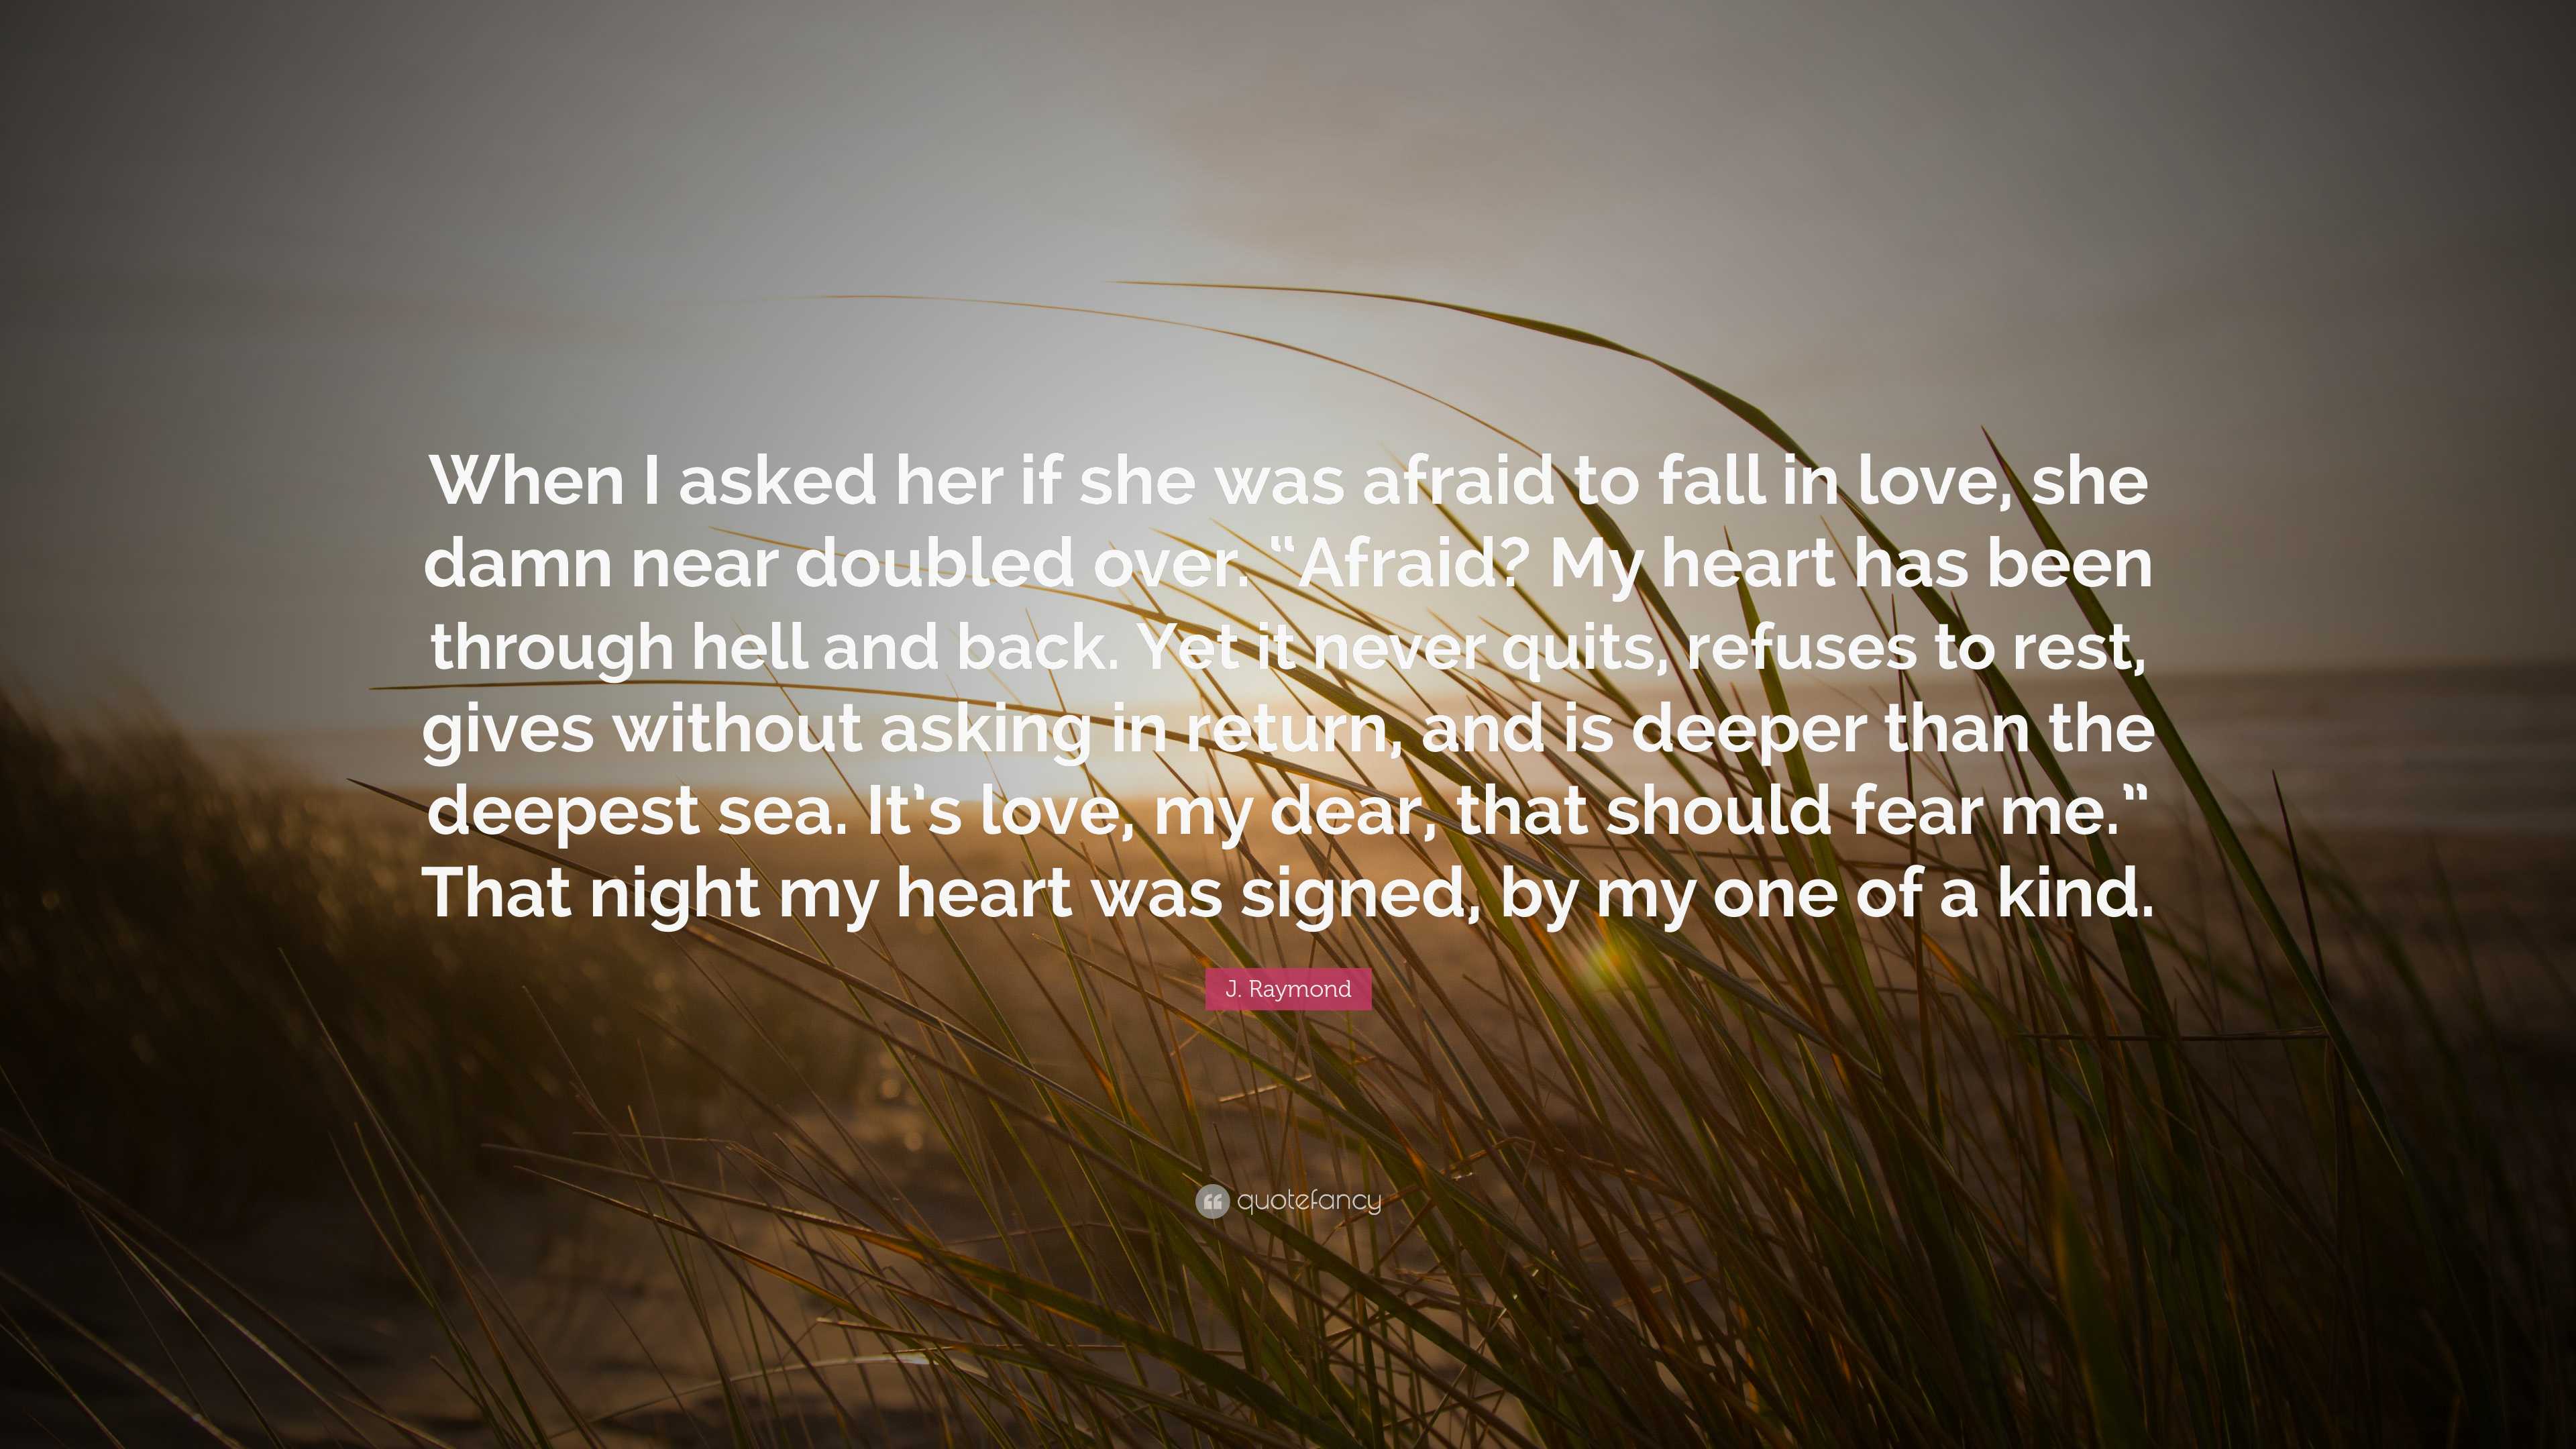 https://quotefancy.com/media/wallpaper/3840x2160/7851953-J-Raymond-Quote-When-I-asked-her-if-she-was-afraid-to-fall-in-love.jpg